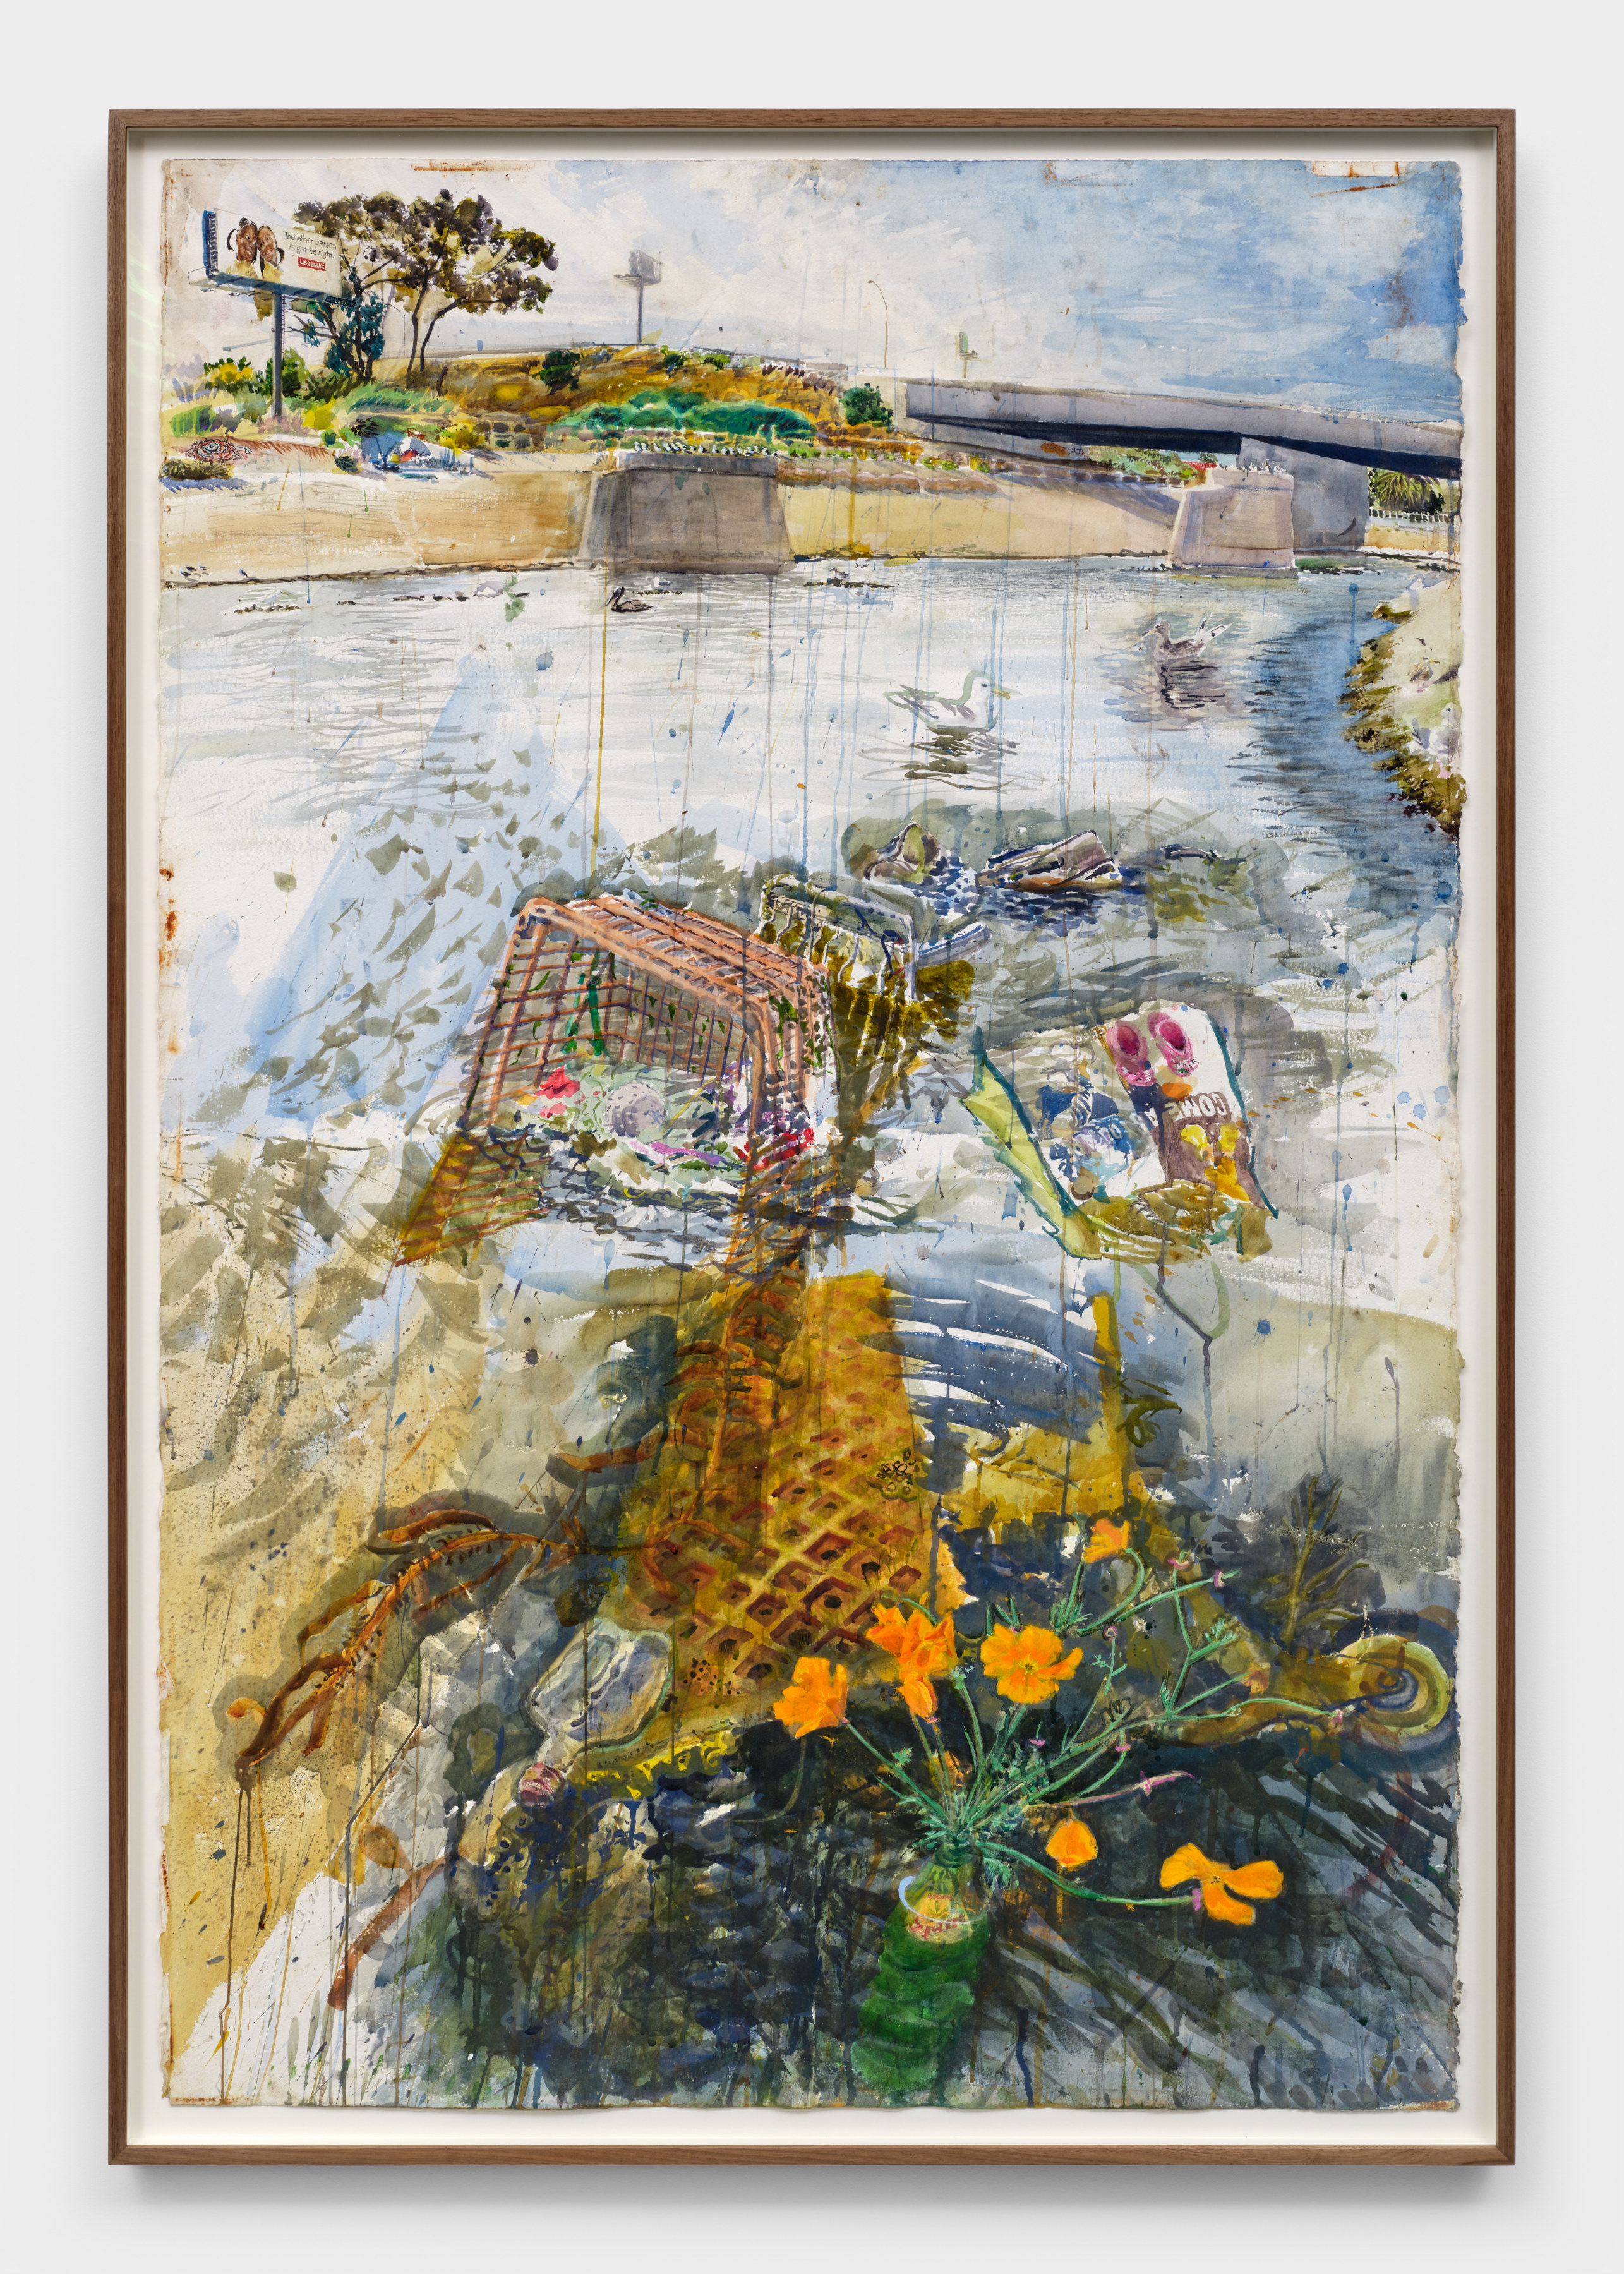 A watercolor painting of a shopping carts, orange poppies and paper garbage floating in the pale blue waters of Ballona Creek with a bridge in the background.